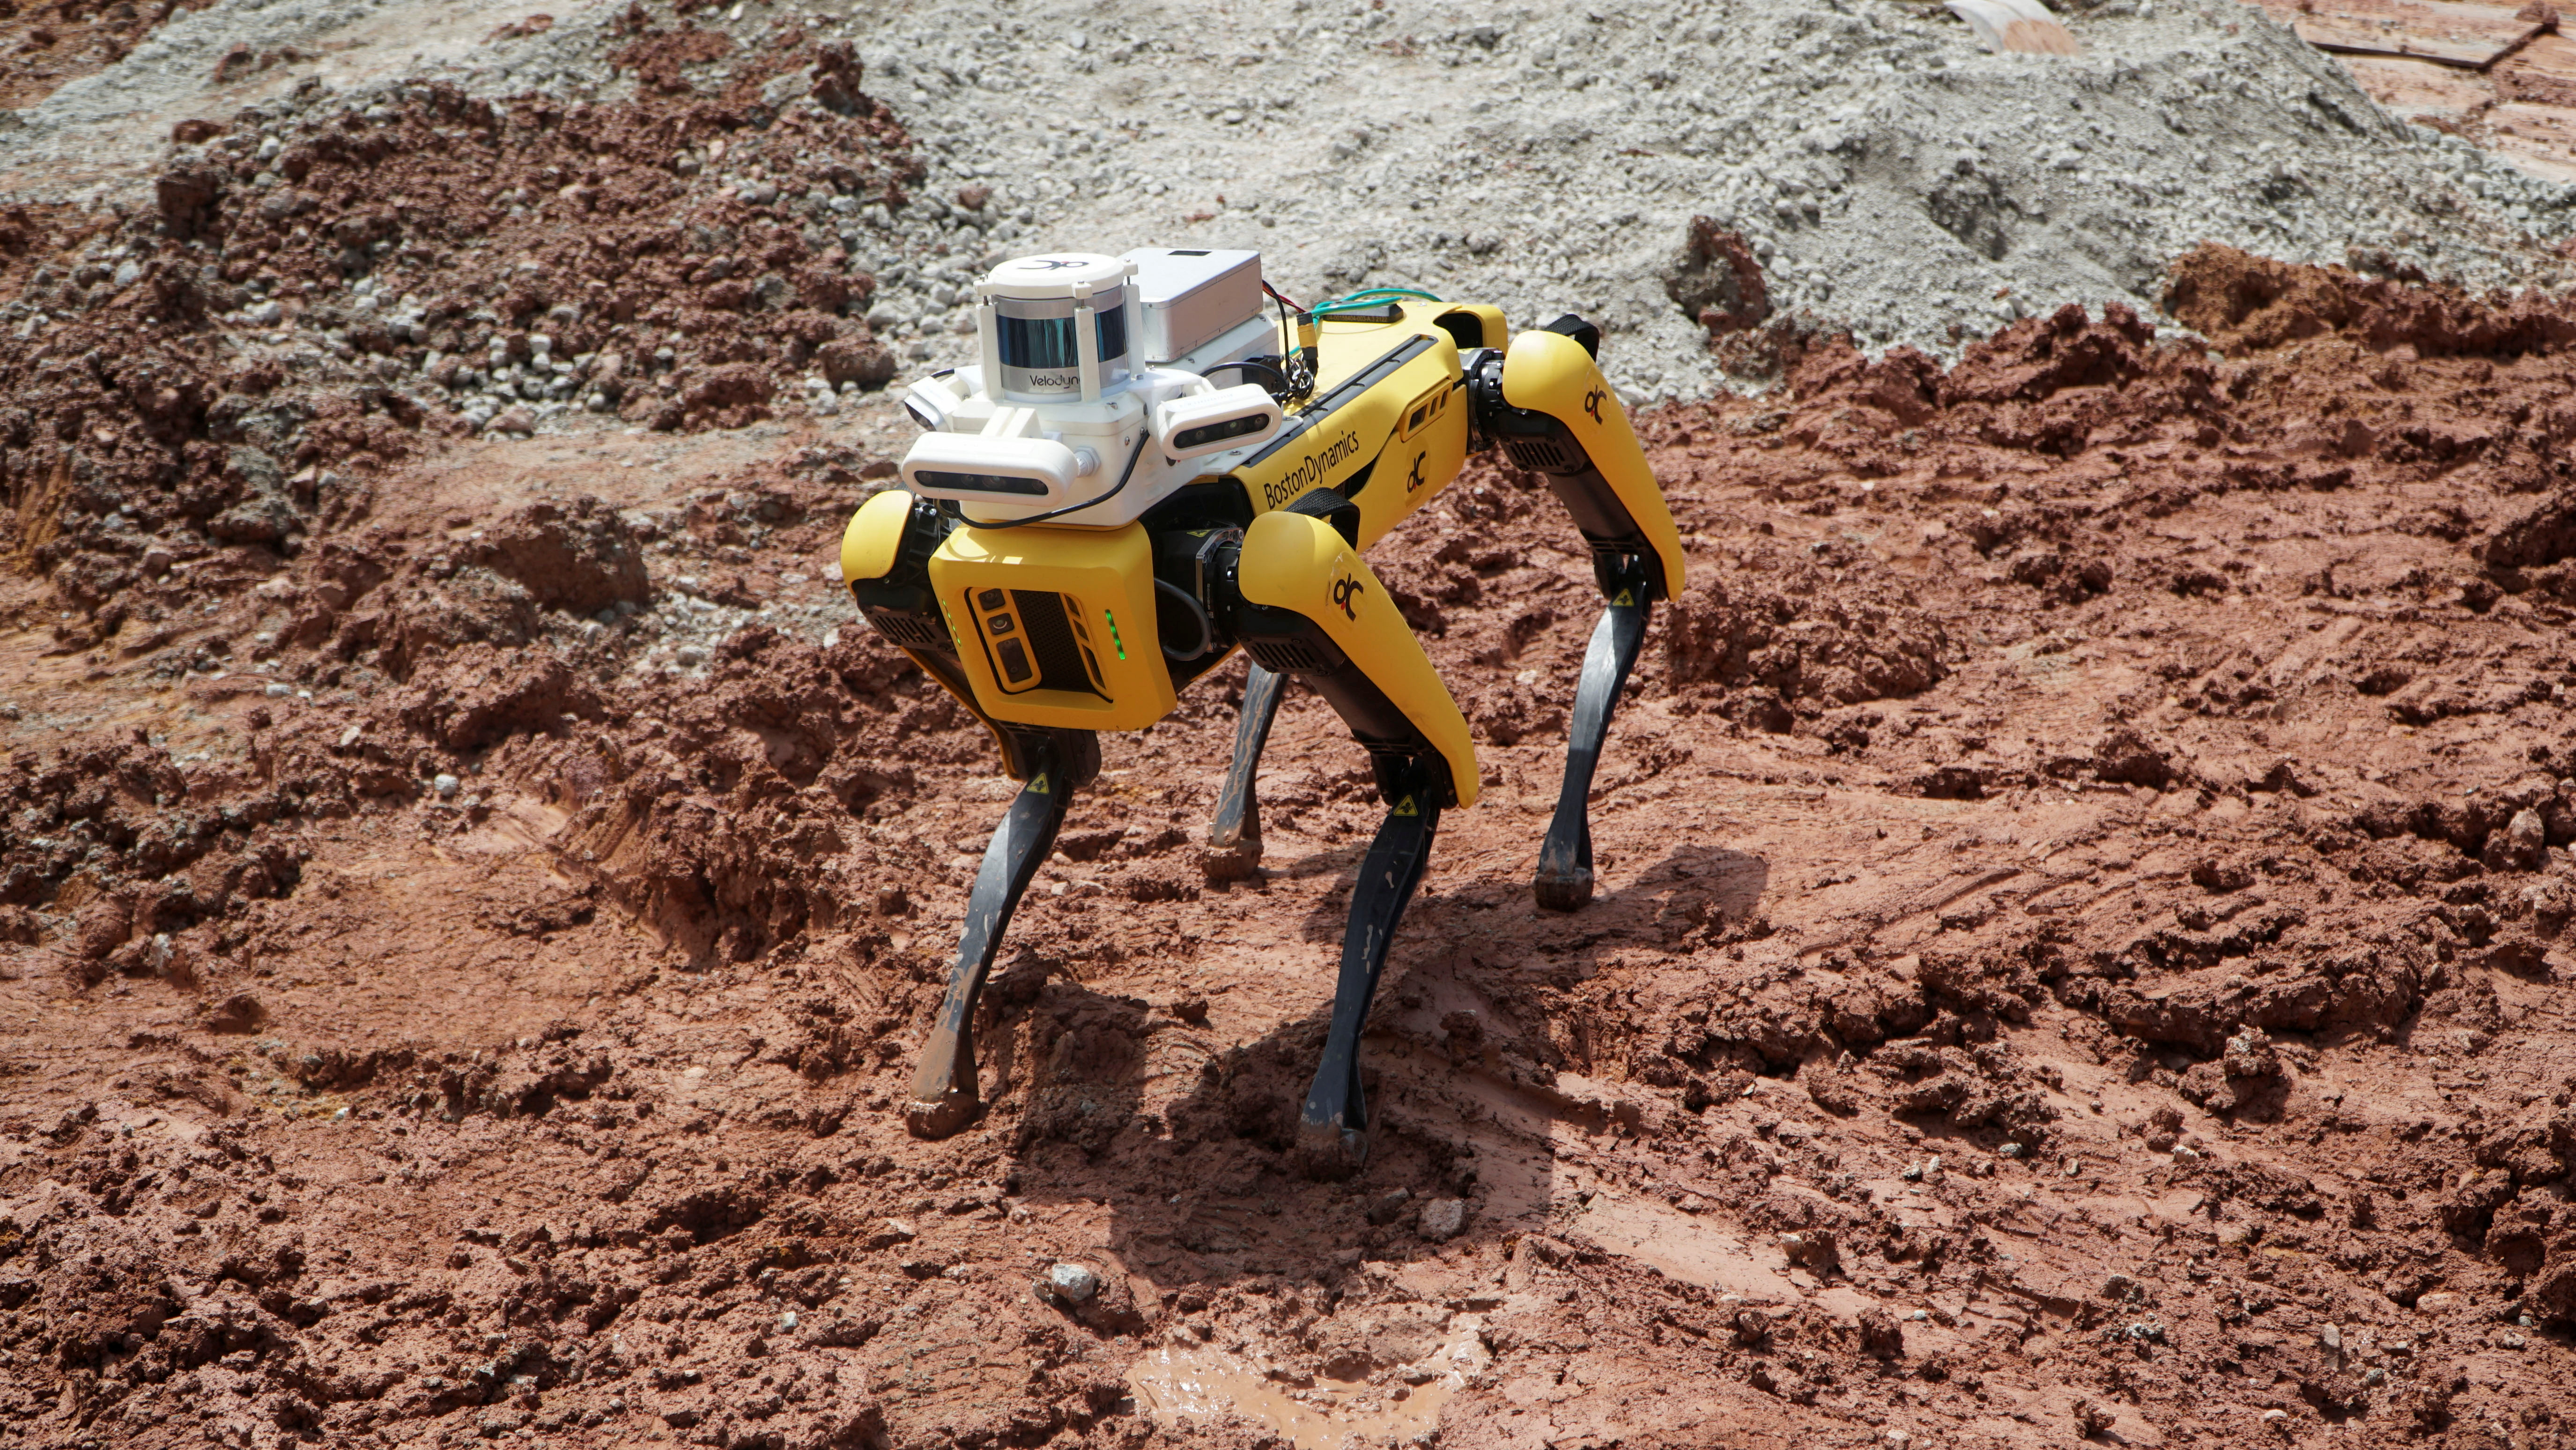 Robot dog, made by Hyundai-owned Boston Dynamics, is used by the Gammon Construction Ltd to make a scan of a construction site for supervisors to check work progress, on Sentosa Island